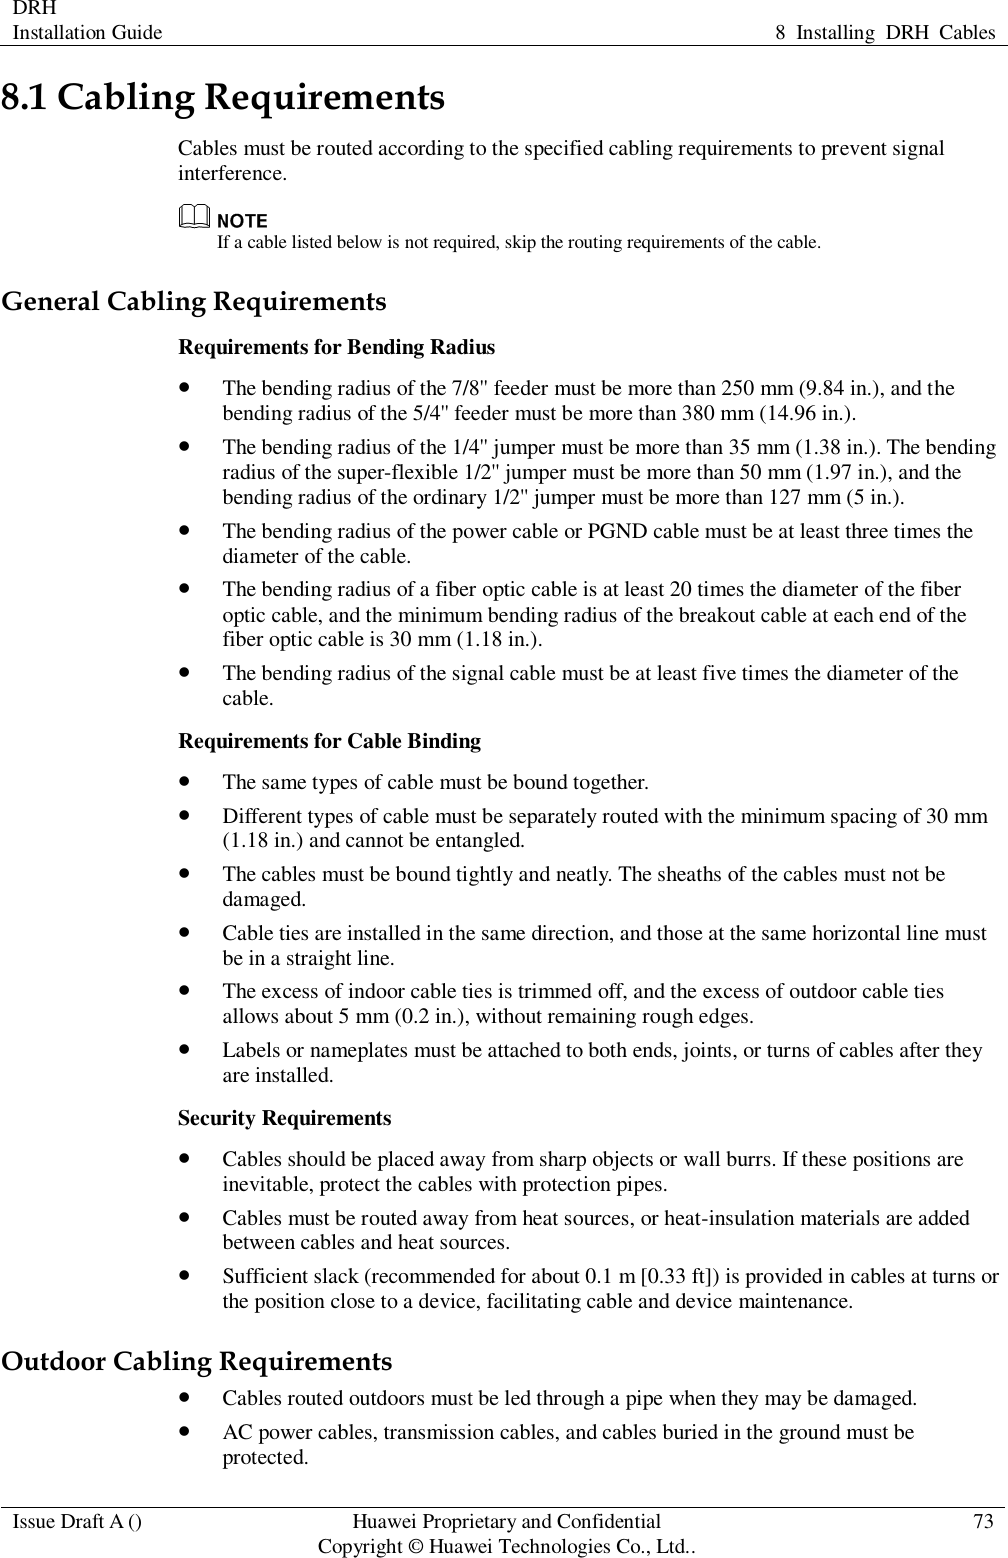 DRH   Installation Guide 8  Installing  DRH  Cables  Issue Draft A () Huawei Proprietary and Confidential                                     Copyright © Huawei Technologies Co., Ltd.. 73  8.1 Cabling Requirements Cables must be routed according to the specified cabling requirements to prevent signal interference.  If a cable listed below is not required, skip the routing requirements of the cable. General Cabling Requirements Requirements for Bending Radius  The bending radius of the 7/8&apos;&apos; feeder must be more than 250 mm (9.84 in.), and the bending radius of the 5/4&apos;&apos; feeder must be more than 380 mm (14.96 in.).  The bending radius of the 1/4&apos;&apos; jumper must be more than 35 mm (1.38 in.). The bending radius of the super-flexible 1/2&apos;&apos; jumper must be more than 50 mm (1.97 in.), and the bending radius of the ordinary 1/2&apos;&apos; jumper must be more than 127 mm (5 in.).  The bending radius of the power cable or PGND cable must be at least three times the diameter of the cable.  The bending radius of a fiber optic cable is at least 20 times the diameter of the fiber optic cable, and the minimum bending radius of the breakout cable at each end of the fiber optic cable is 30 mm (1.18 in.).  The bending radius of the signal cable must be at least five times the diameter of the cable. Requirements for Cable Binding  The same types of cable must be bound together.  Different types of cable must be separately routed with the minimum spacing of 30 mm (1.18 in.) and cannot be entangled.  The cables must be bound tightly and neatly. The sheaths of the cables must not be damaged.  Cable ties are installed in the same direction, and those at the same horizontal line must be in a straight line.  The excess of indoor cable ties is trimmed off, and the excess of outdoor cable ties allows about 5 mm (0.2 in.), without remaining rough edges.  Labels or nameplates must be attached to both ends, joints, or turns of cables after they are installed. Security Requirements  Cables should be placed away from sharp objects or wall burrs. If these positions are inevitable, protect the cables with protection pipes.  Cables must be routed away from heat sources, or heat-insulation materials are added between cables and heat sources.  Sufficient slack (recommended for about 0.1 m [0.33 ft]) is provided in cables at turns or the position close to a device, facilitating cable and device maintenance. Outdoor Cabling Requirements  Cables routed outdoors must be led through a pipe when they may be damaged.  AC power cables, transmission cables, and cables buried in the ground must be protected. 